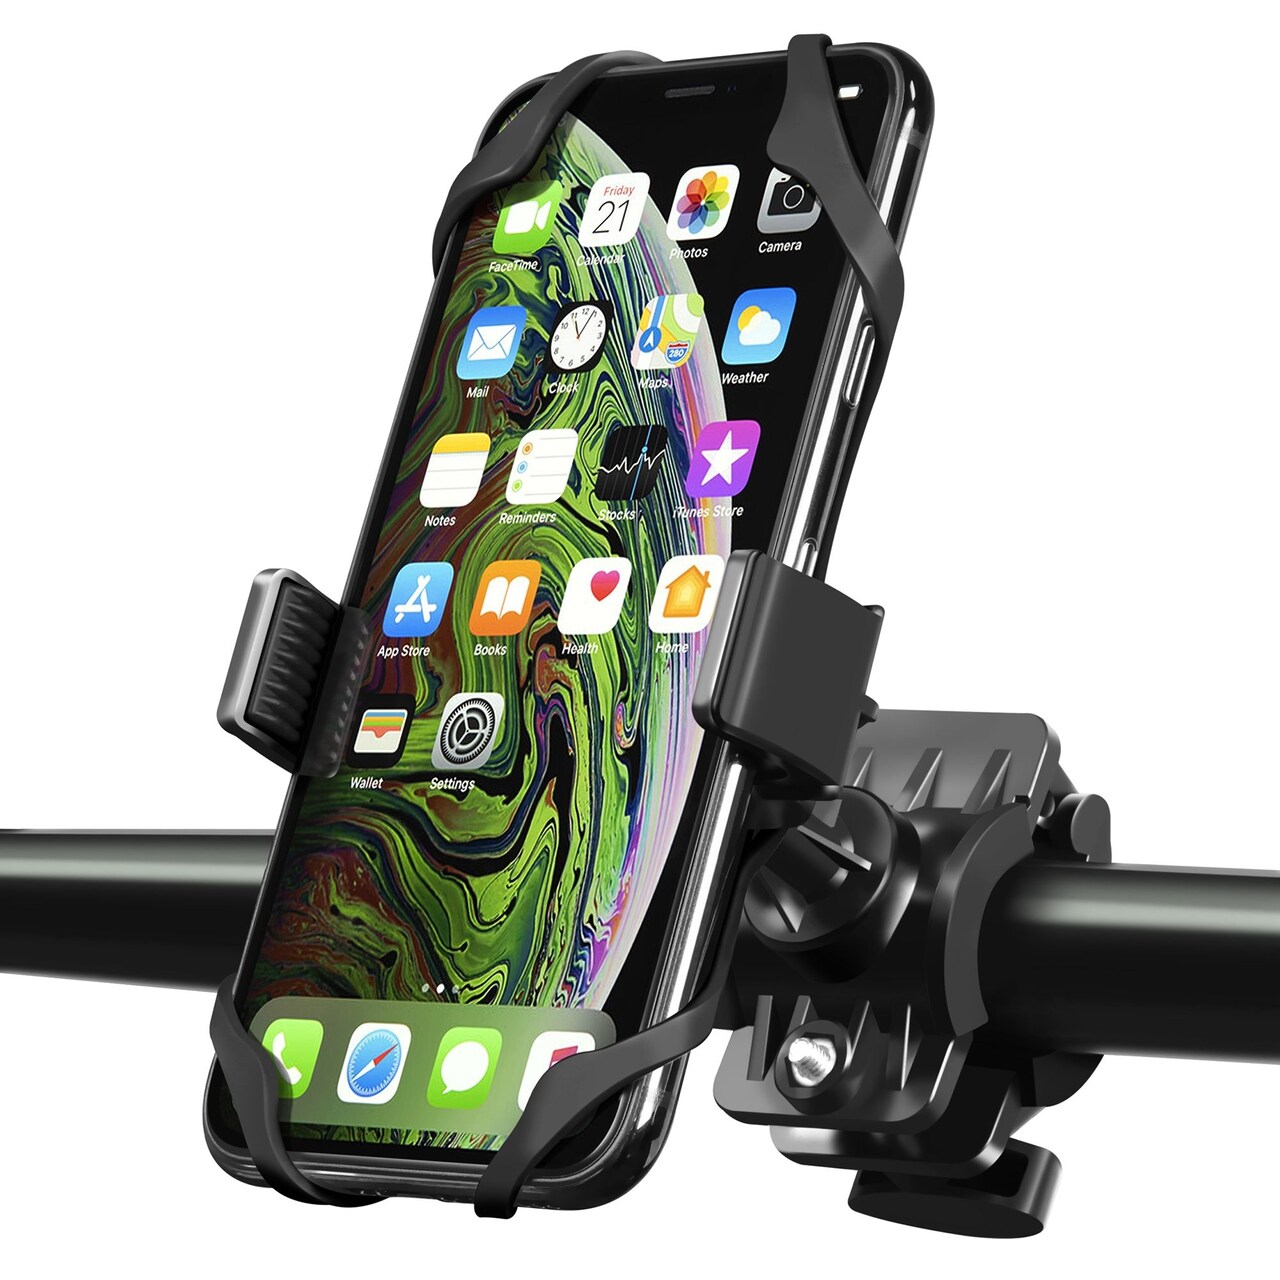 Bike Mount Phone Holder, Insten Universal Bicycle Motorcycle MTB Rack Handlebars Cradle w Secure Grip 360 Rotatable Rubber Strap Compatible with iPhone 11 12 Mini Pro Max Xs Xr SE 2020 8 Plus, Black